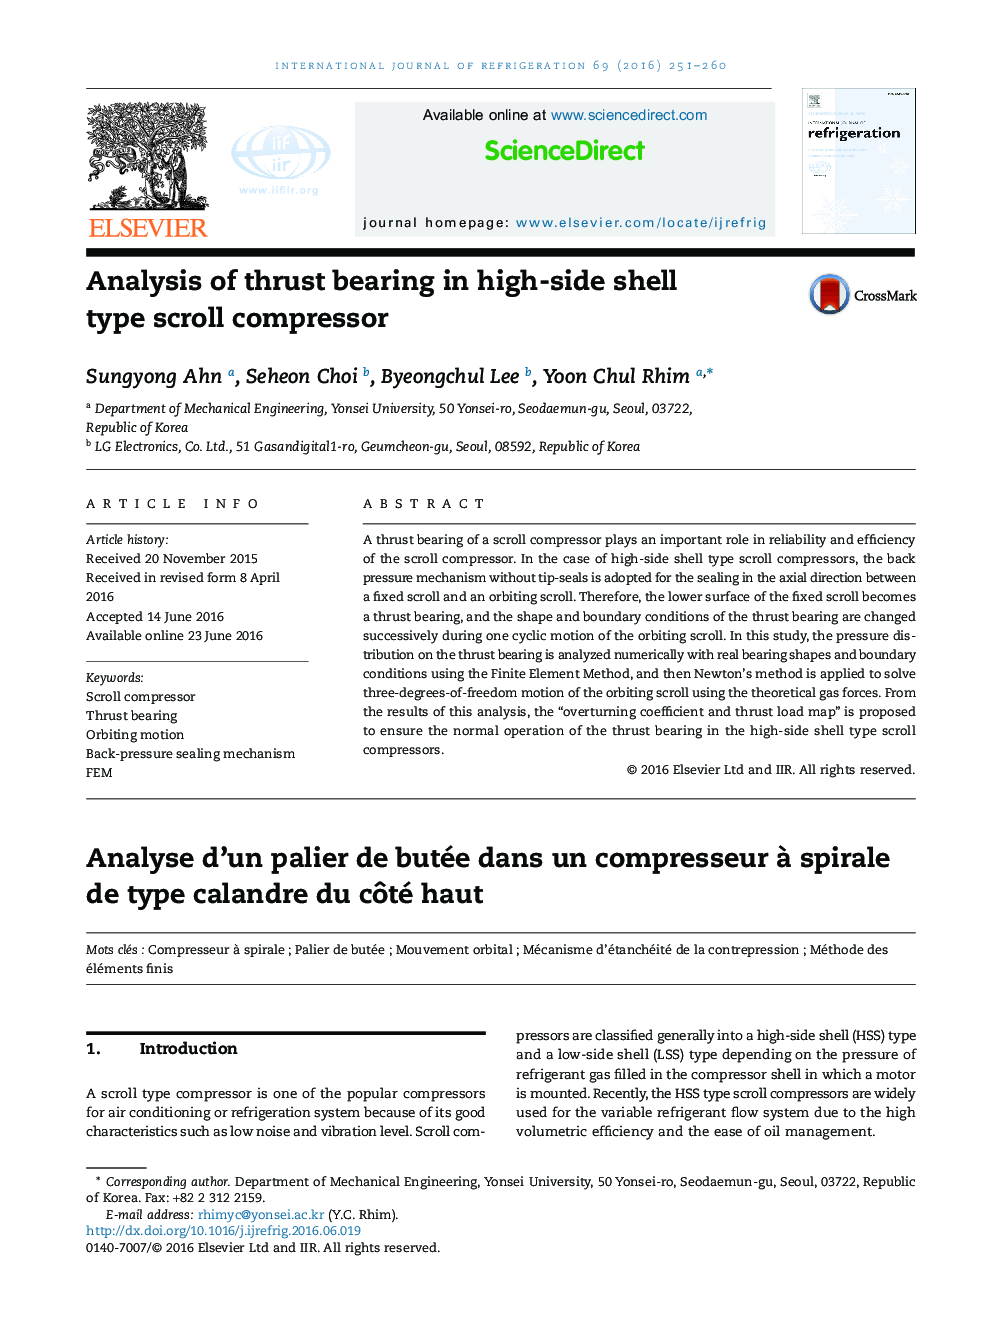 Analysis of thrust bearing in high-side shell type scroll compressor